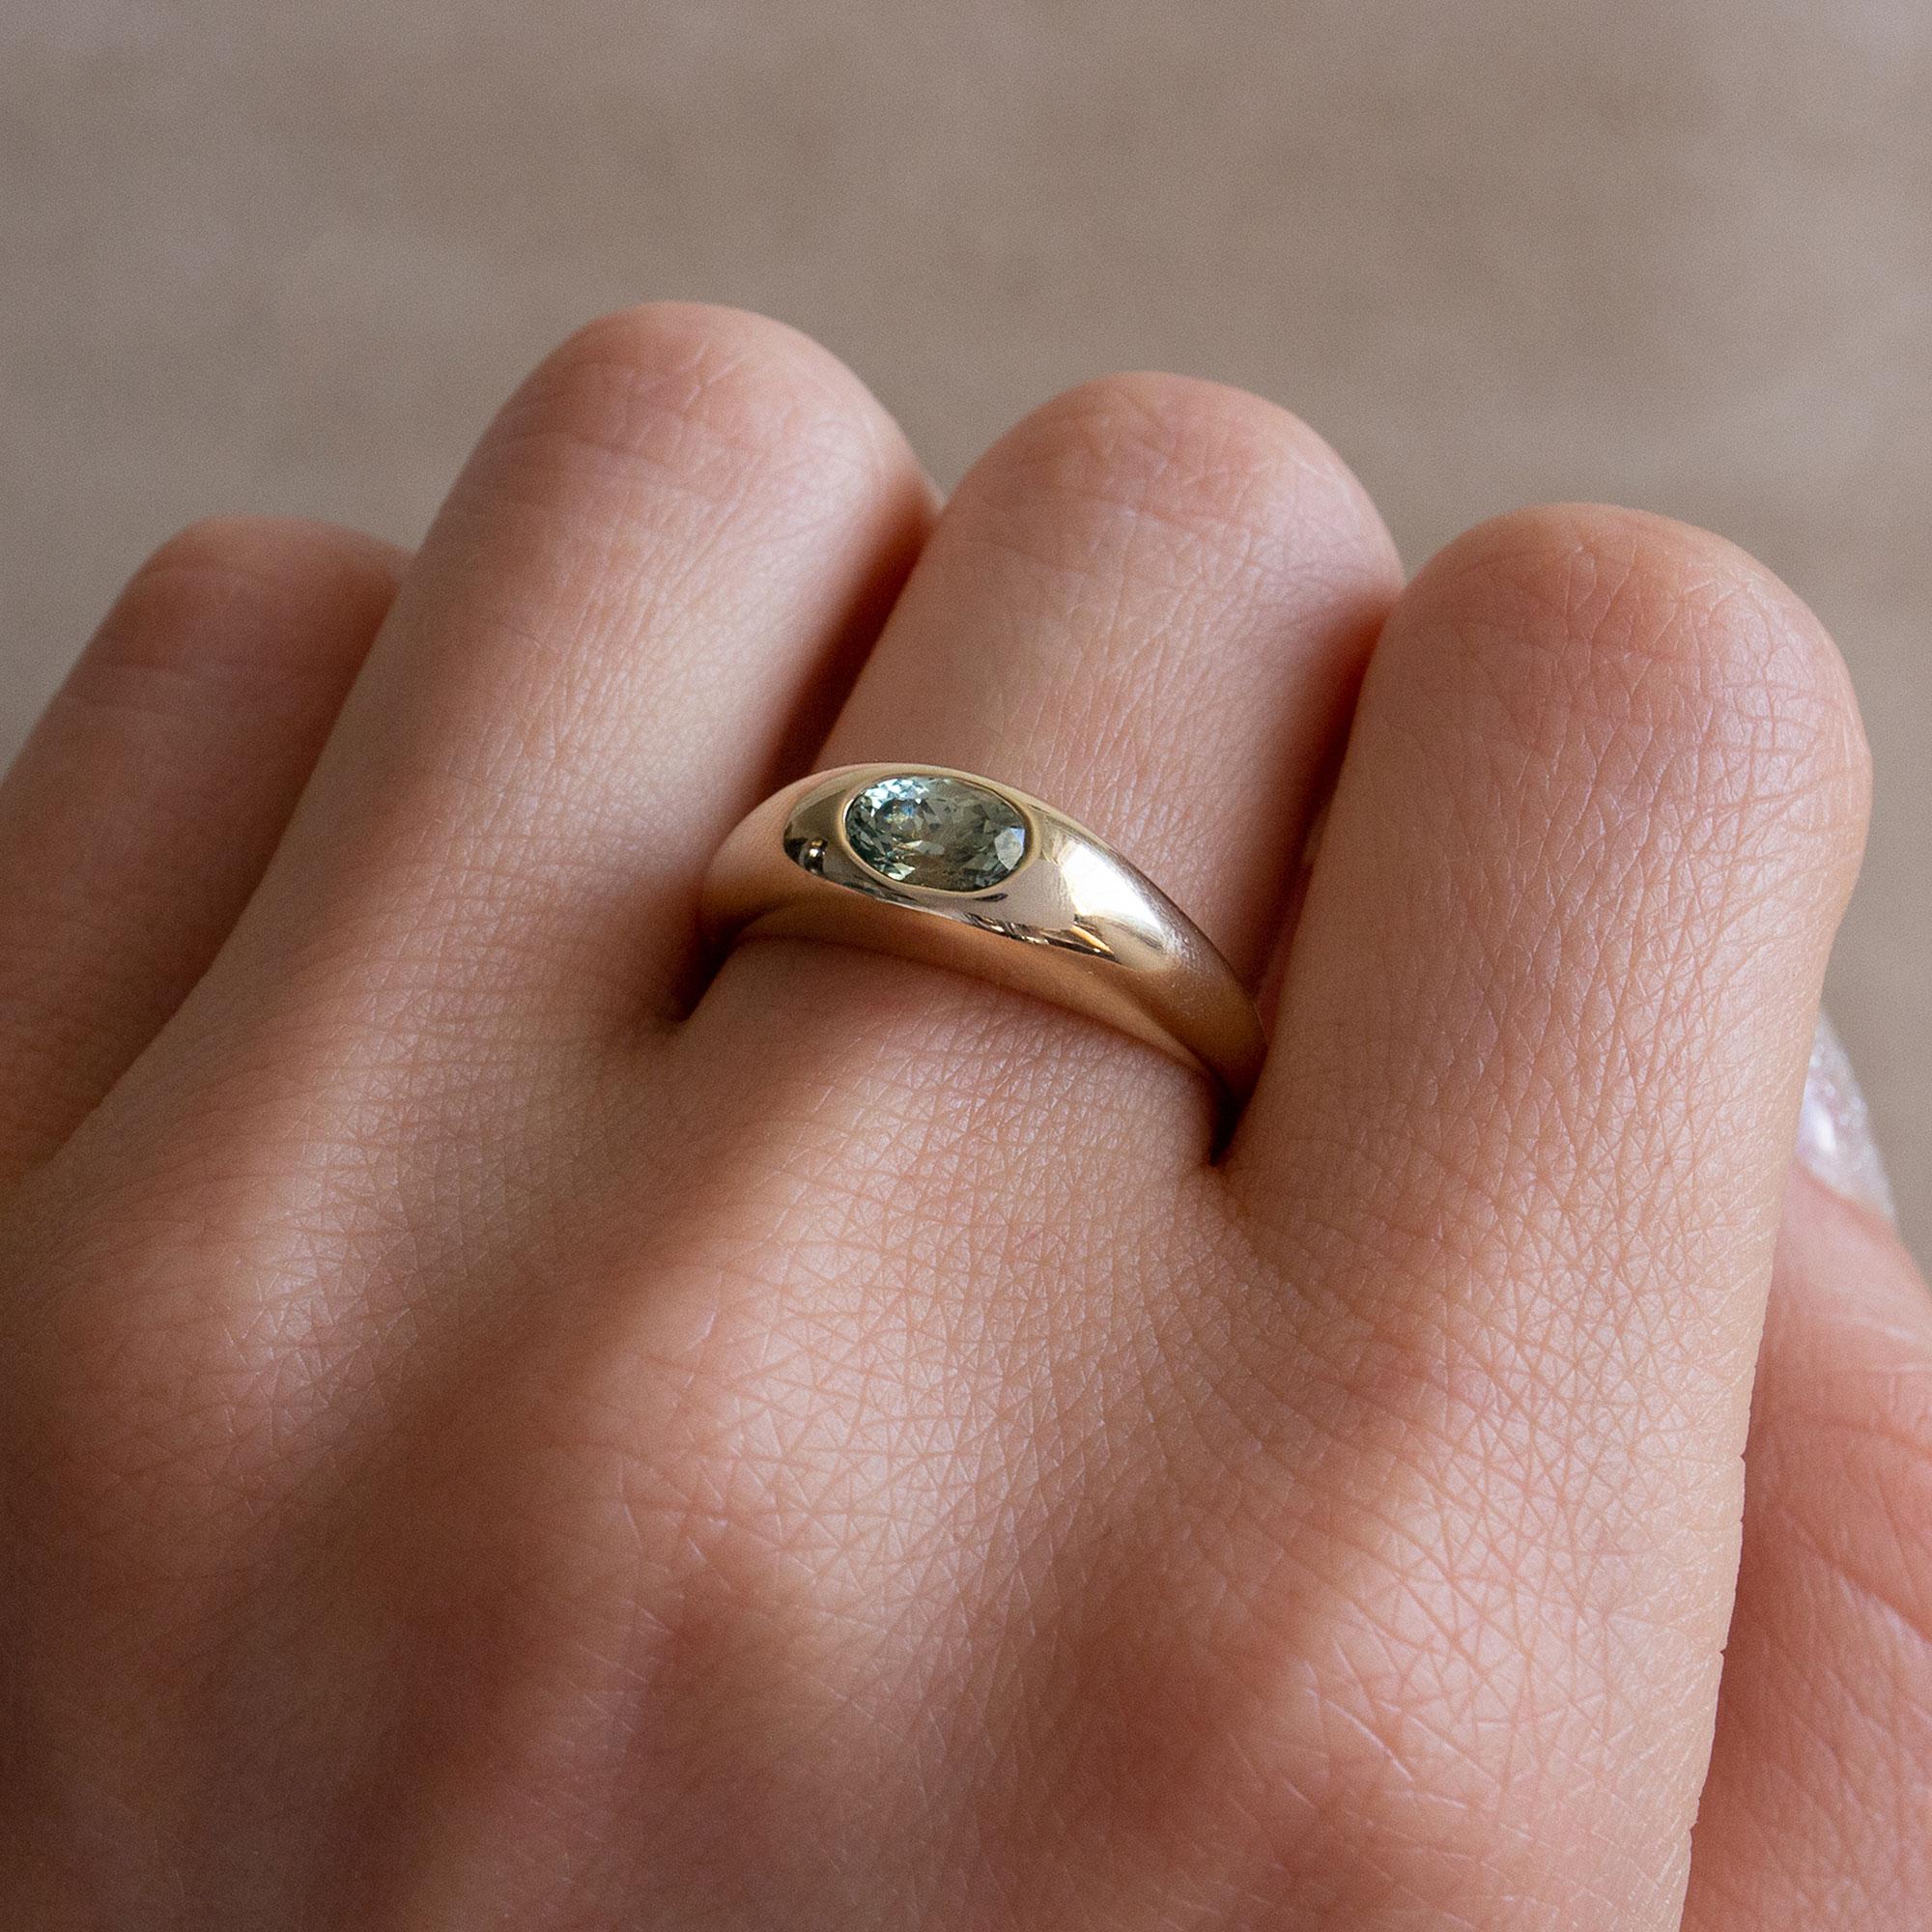 Risa is a solid, signet-style ring with a soft, smooth touch. The original inspiration came from an early 14th century British stirrup ring. I plumped it up to add a luxurious weightiness and added a pool of color at is peak.

US RING SIZE 7
14K